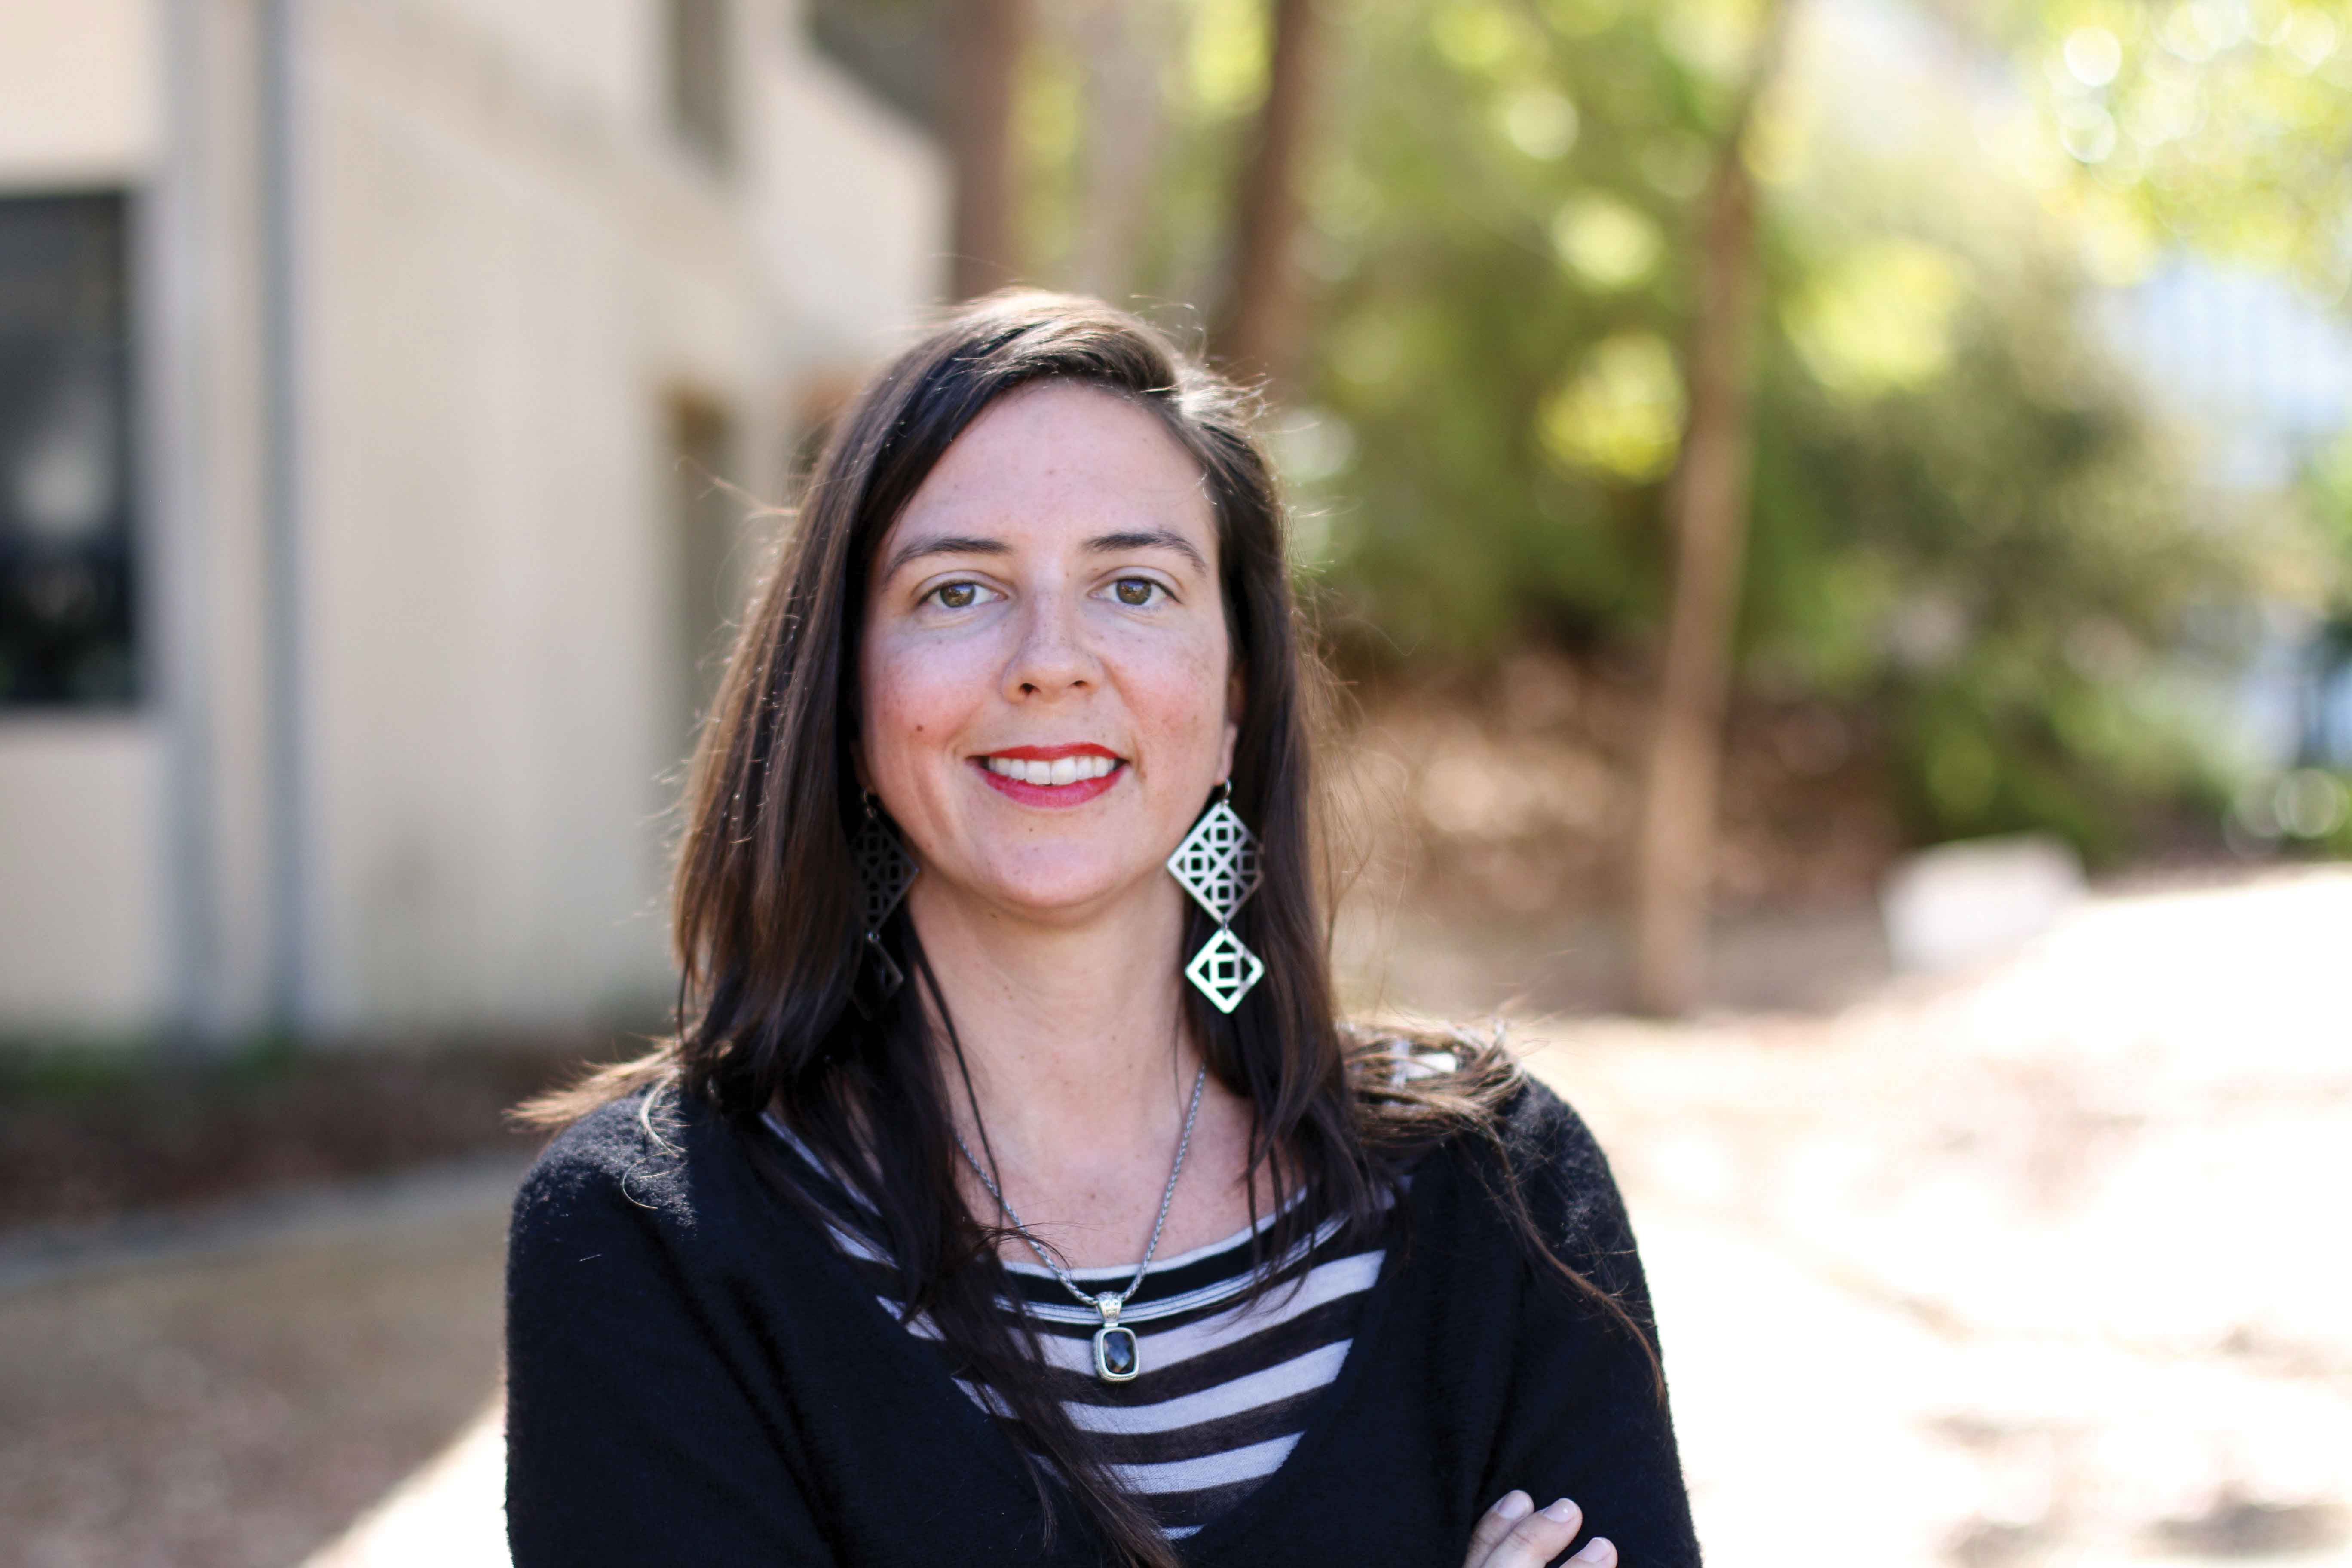 Cal Poly professor Colleen Carrigan smiles on campus